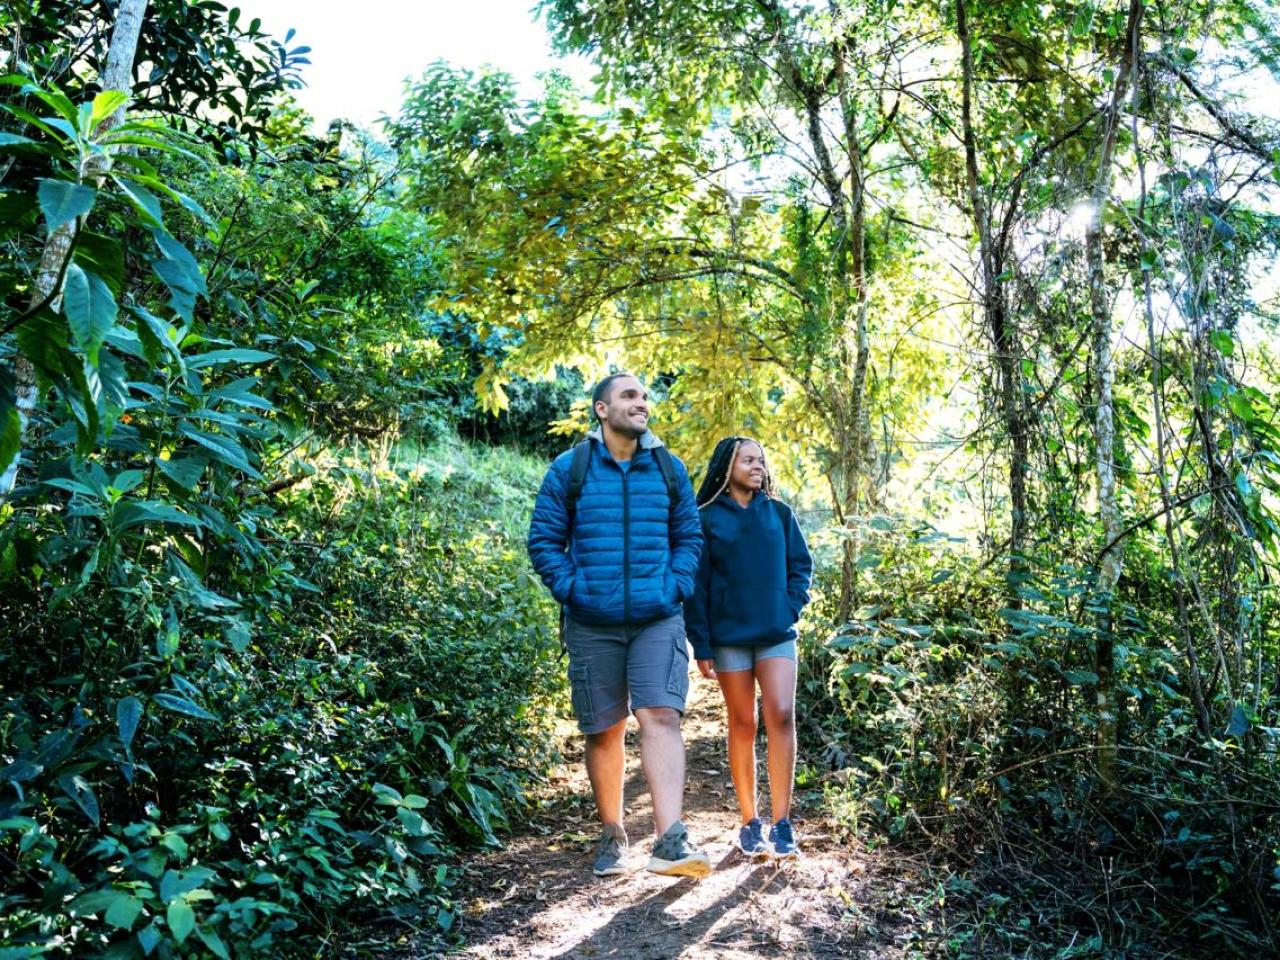 Two people walking in a lush forested area.